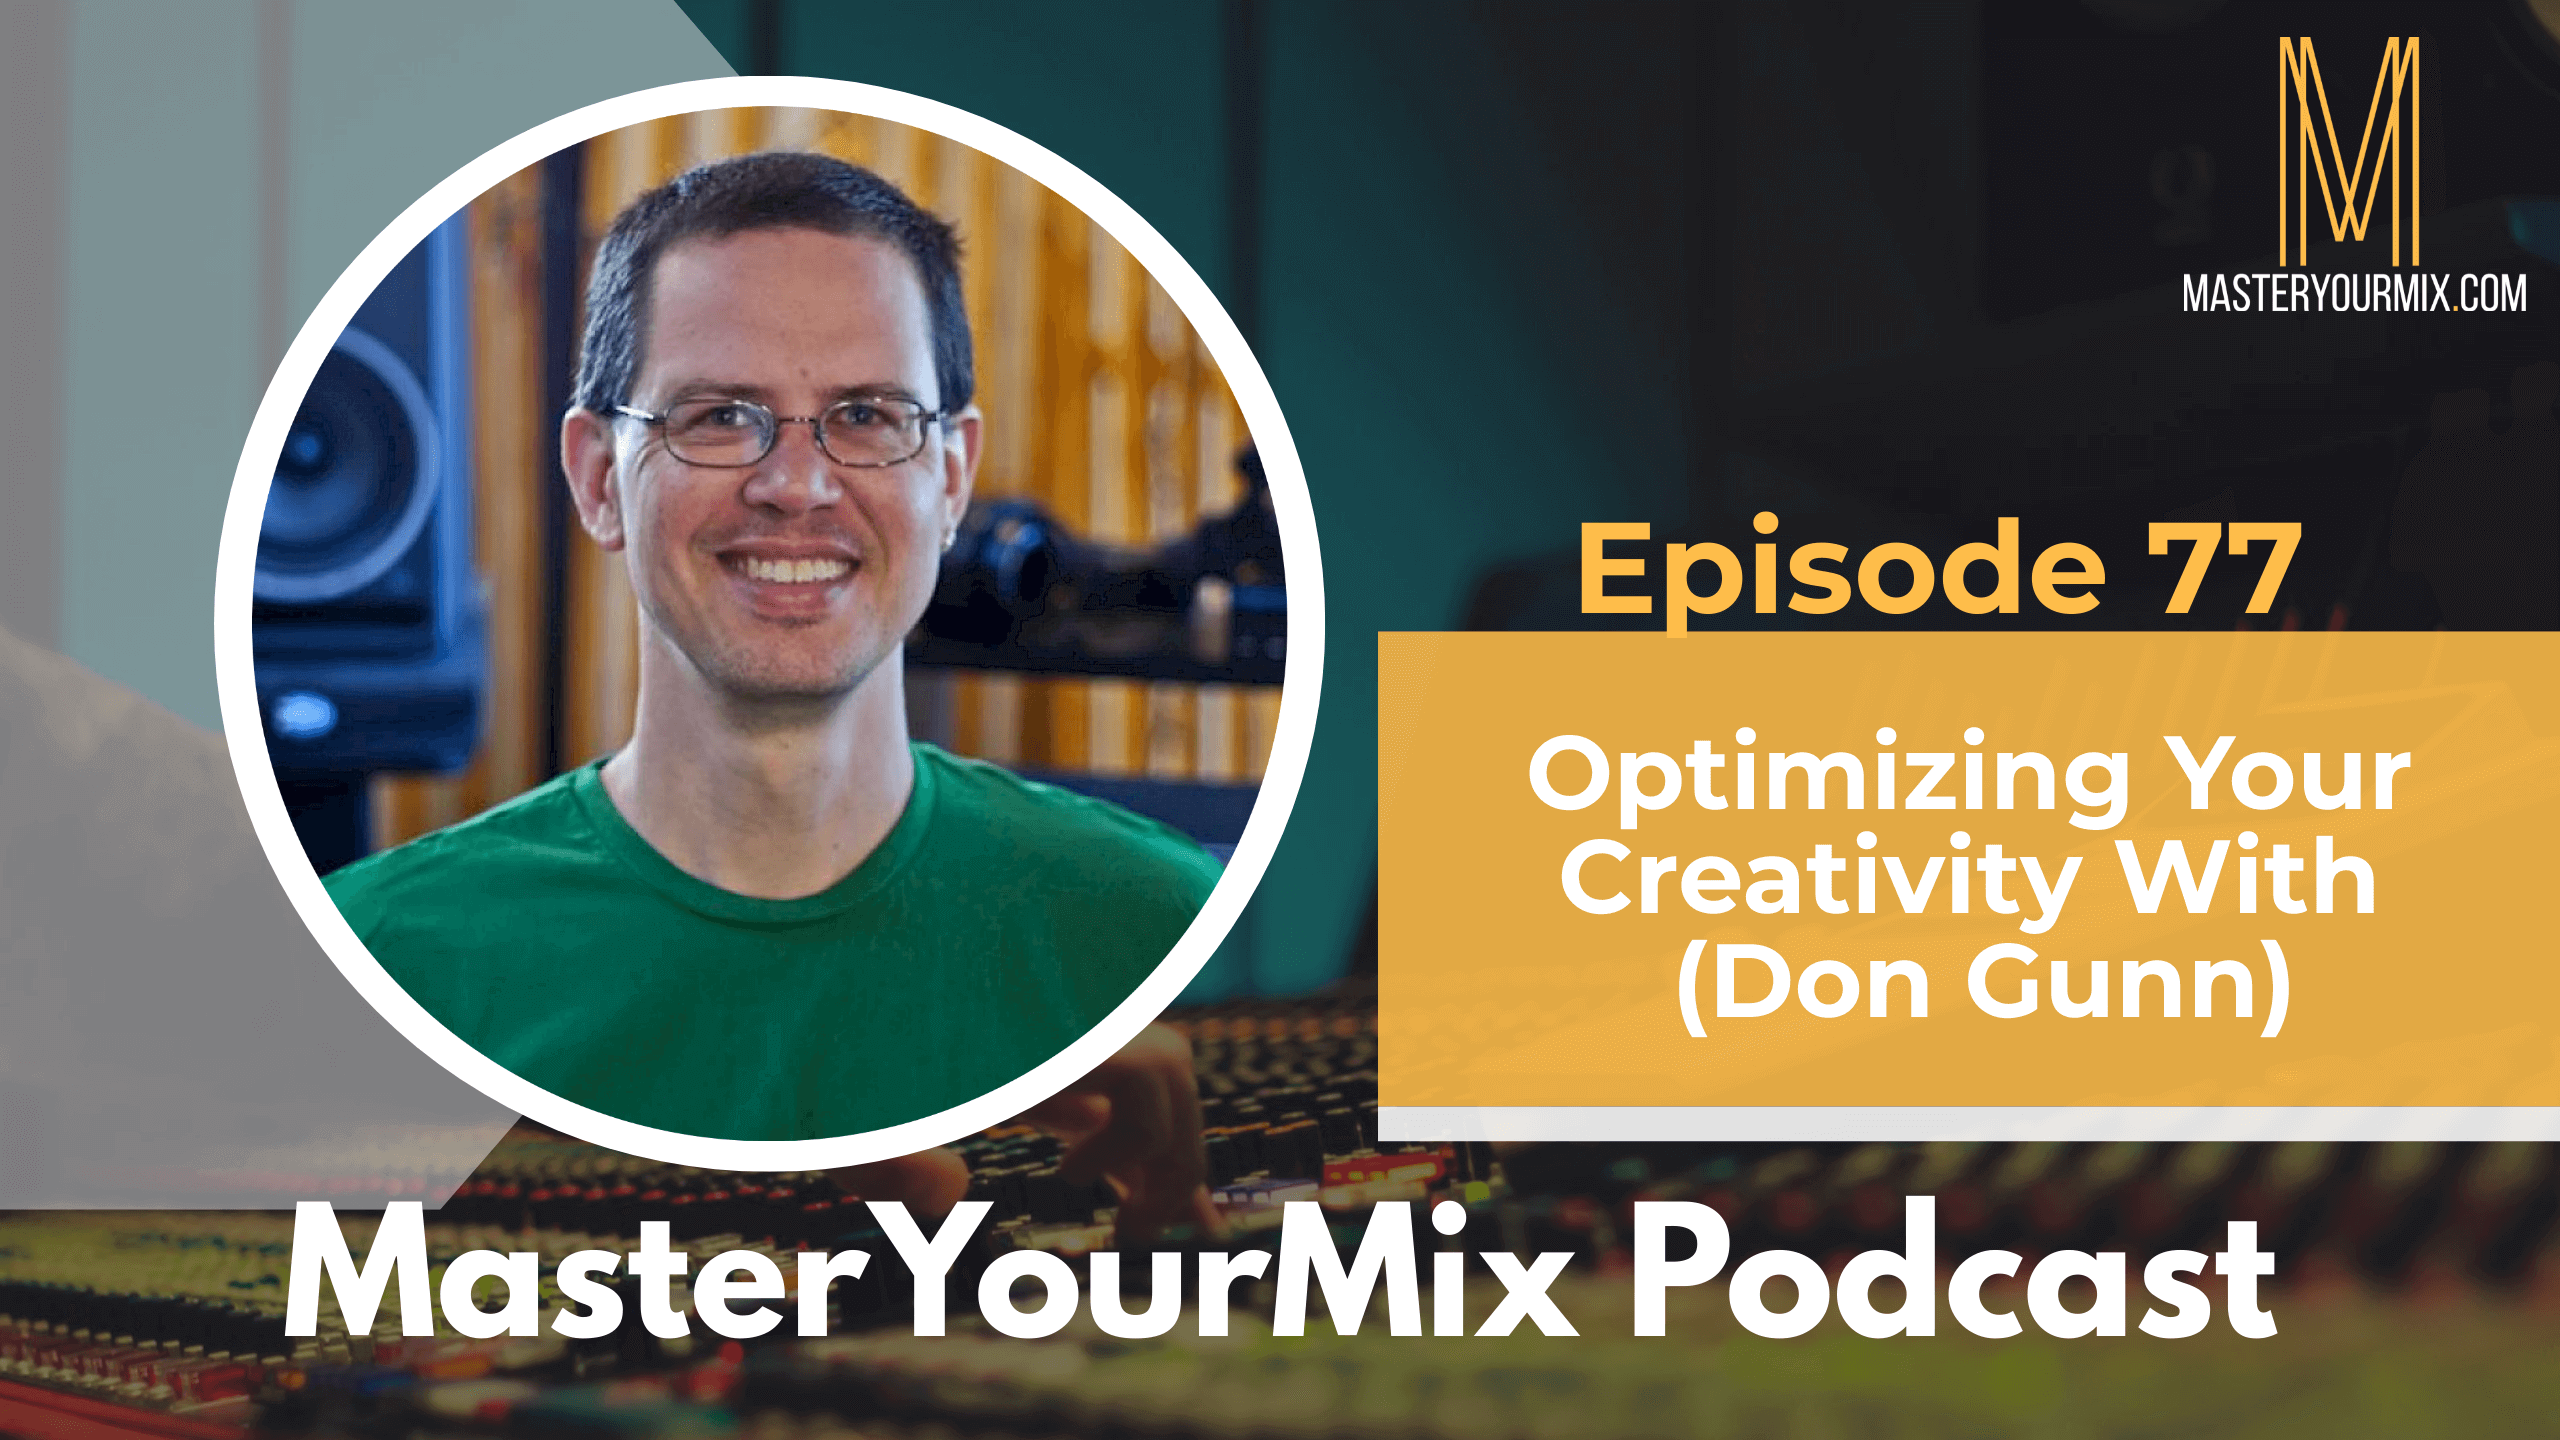 master your mix podcast, ep 77 don gunn